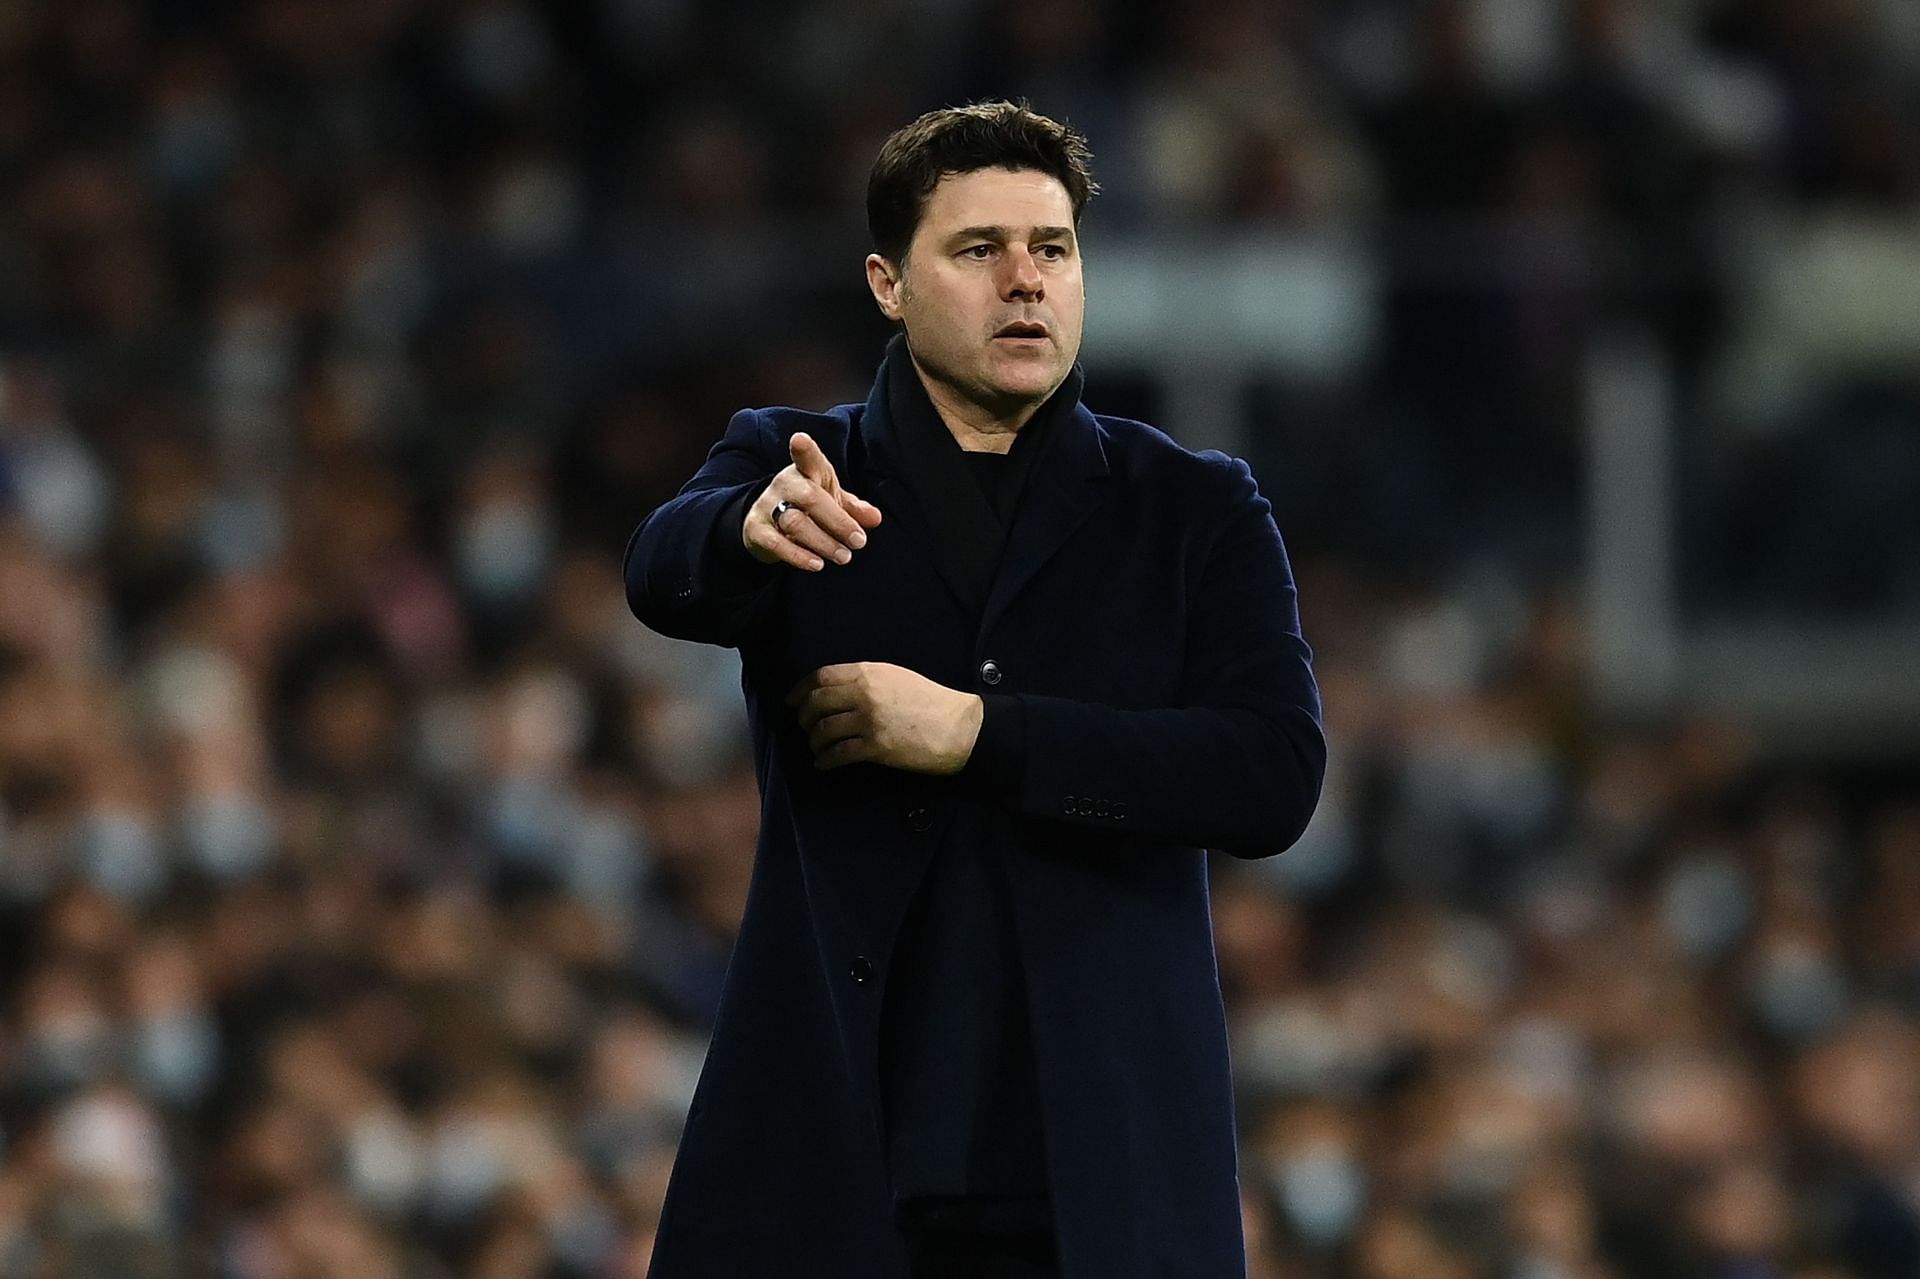 Pochettino is certain to leave the club at the end of the current season